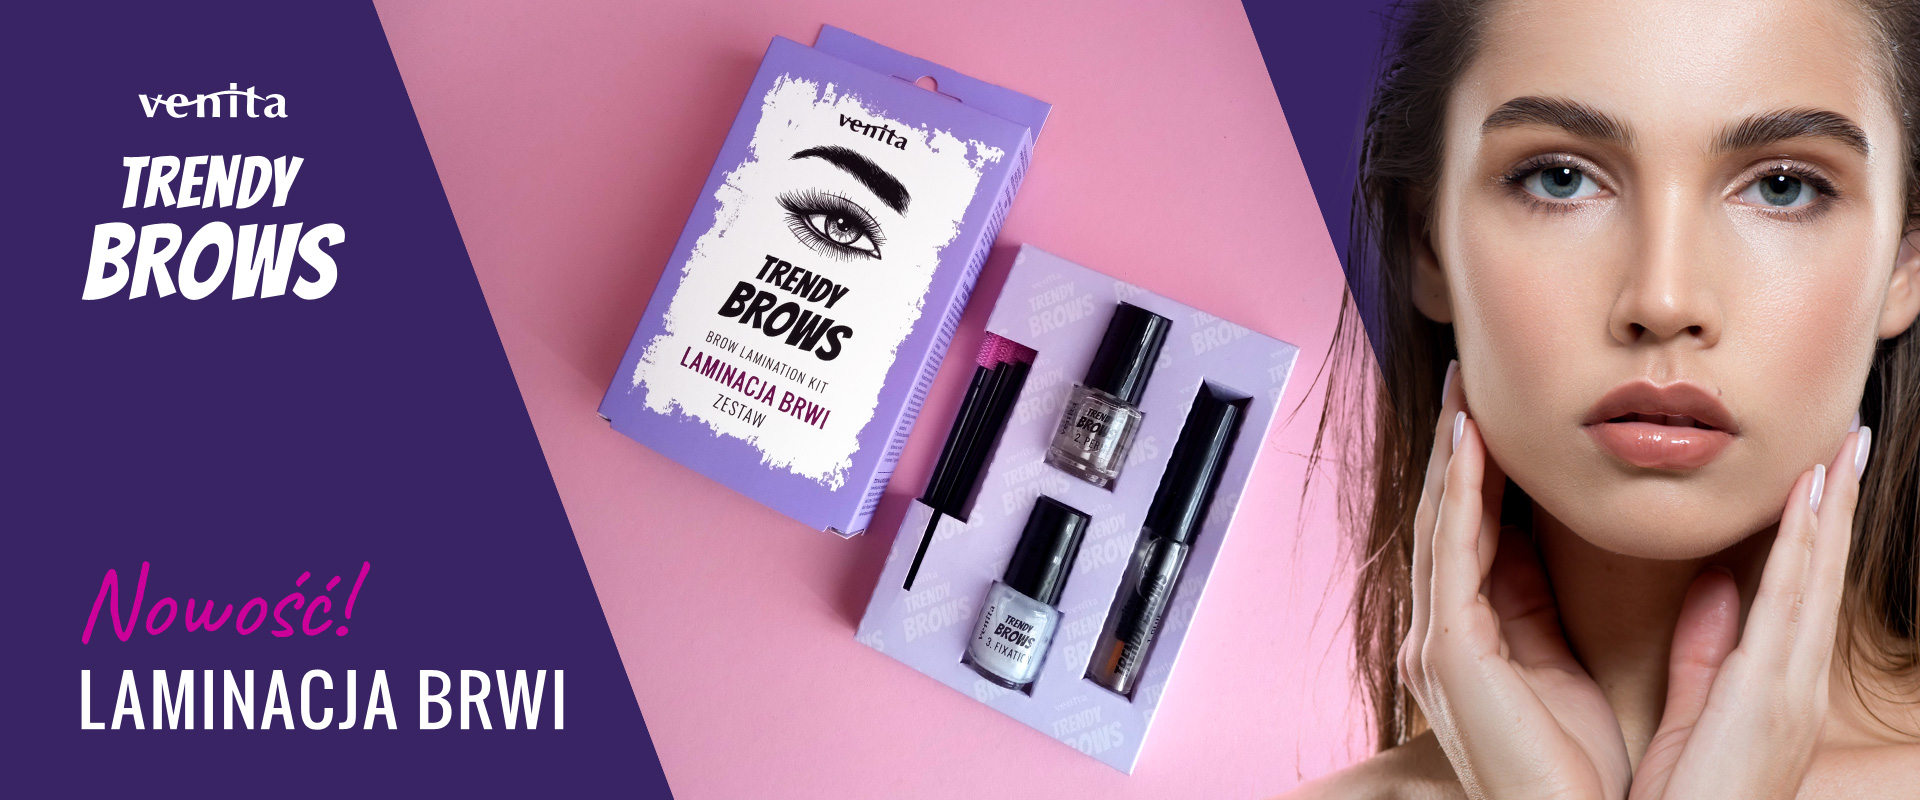 Brow lamination kit packagings and a model with fluffy brows